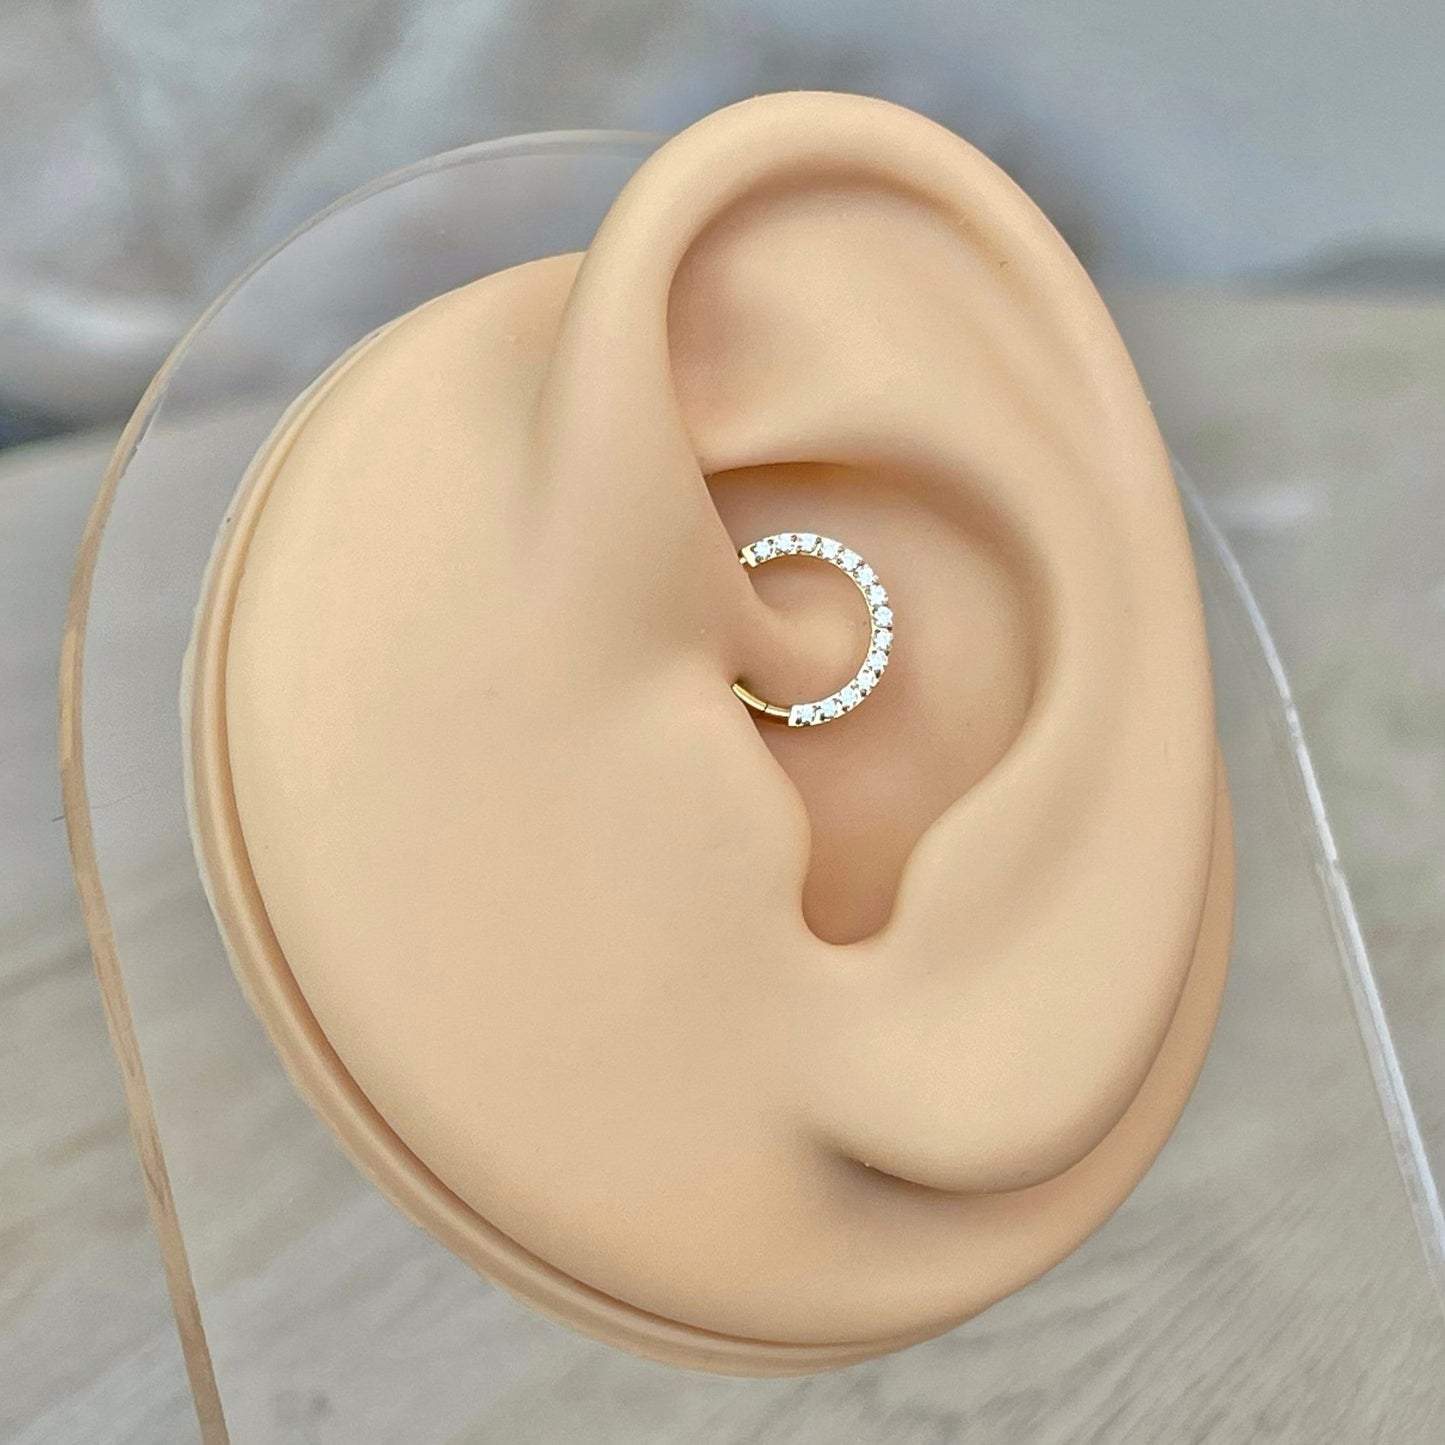 Titanium Daith Earring (14G, 16G, or 18G | 6mm, 8mm, or 10mm | Titanium | Silver, Gold, Rose Gold, or Black)